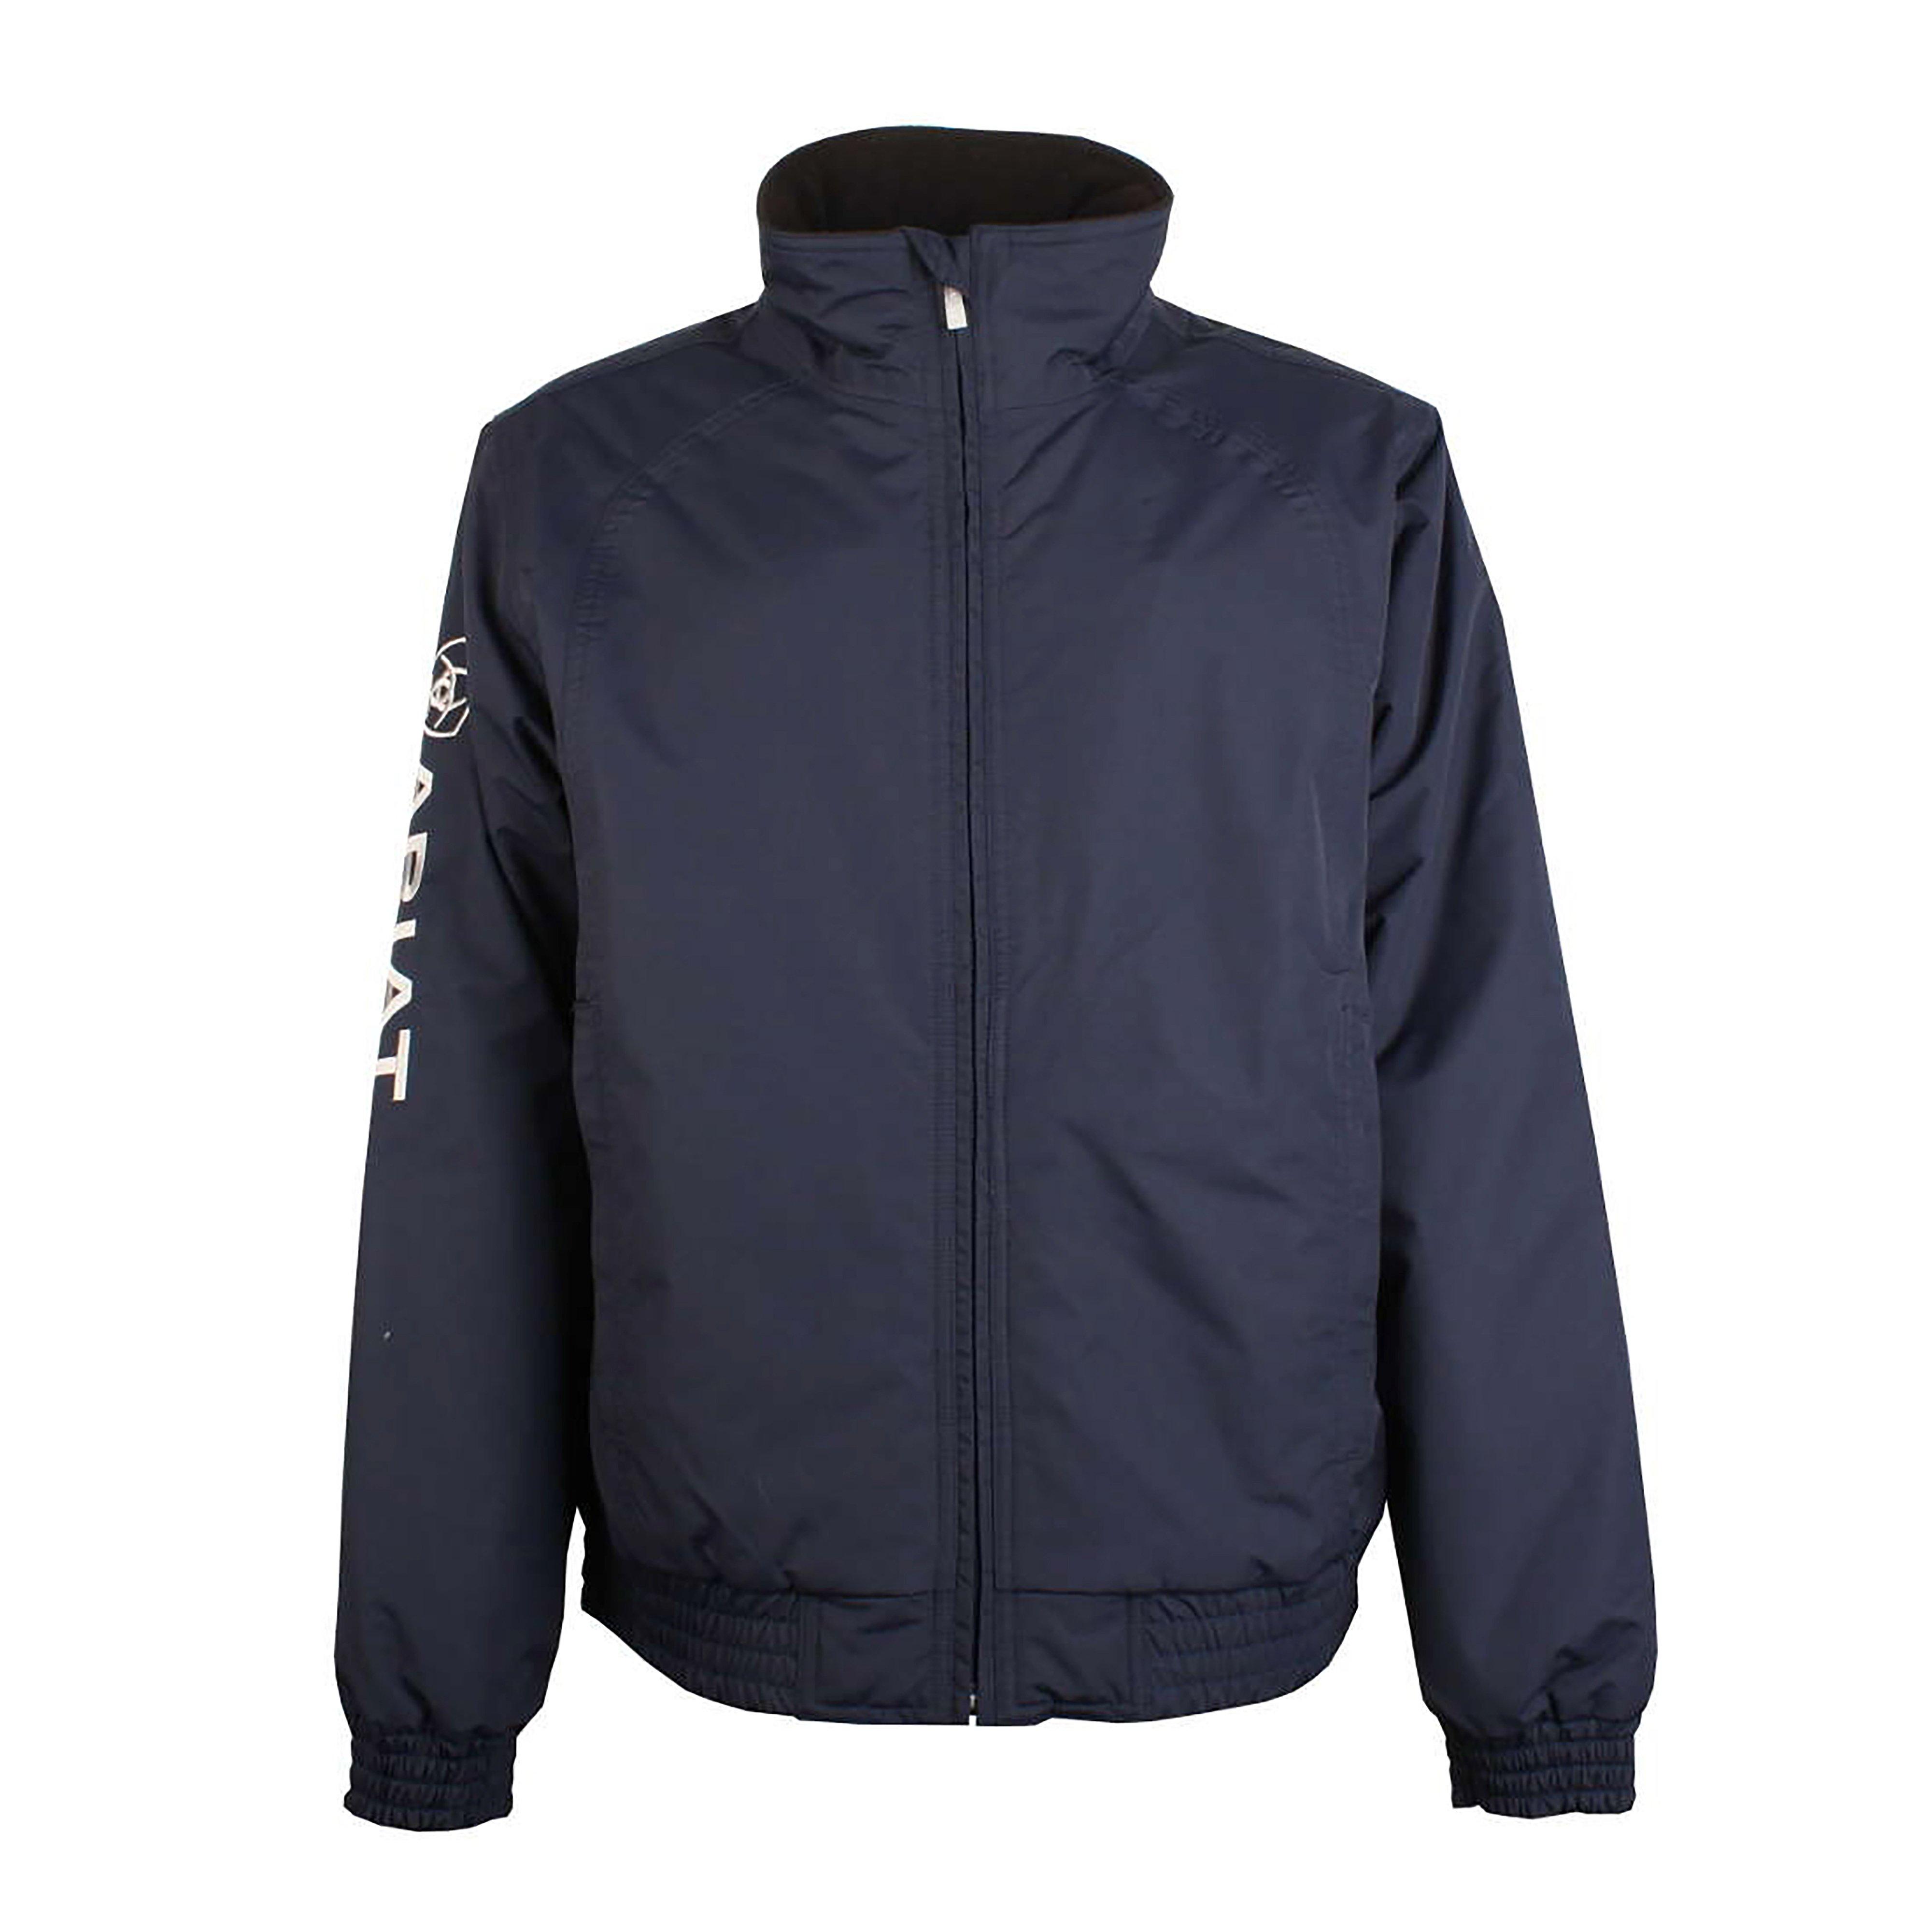 Womens Team Stable Jacket Navy